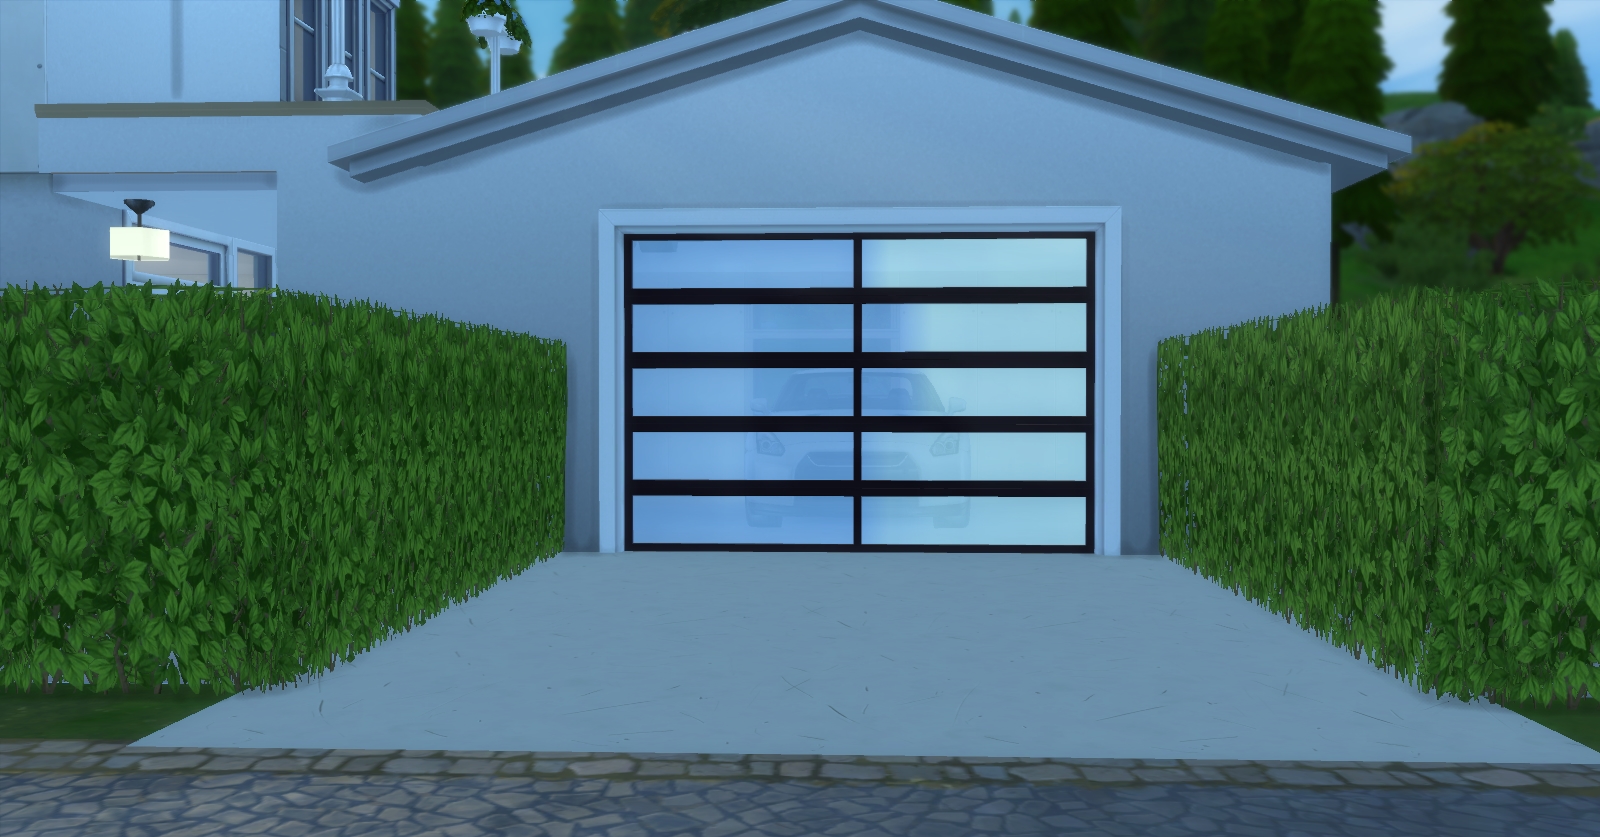 Mod The Sims Garages